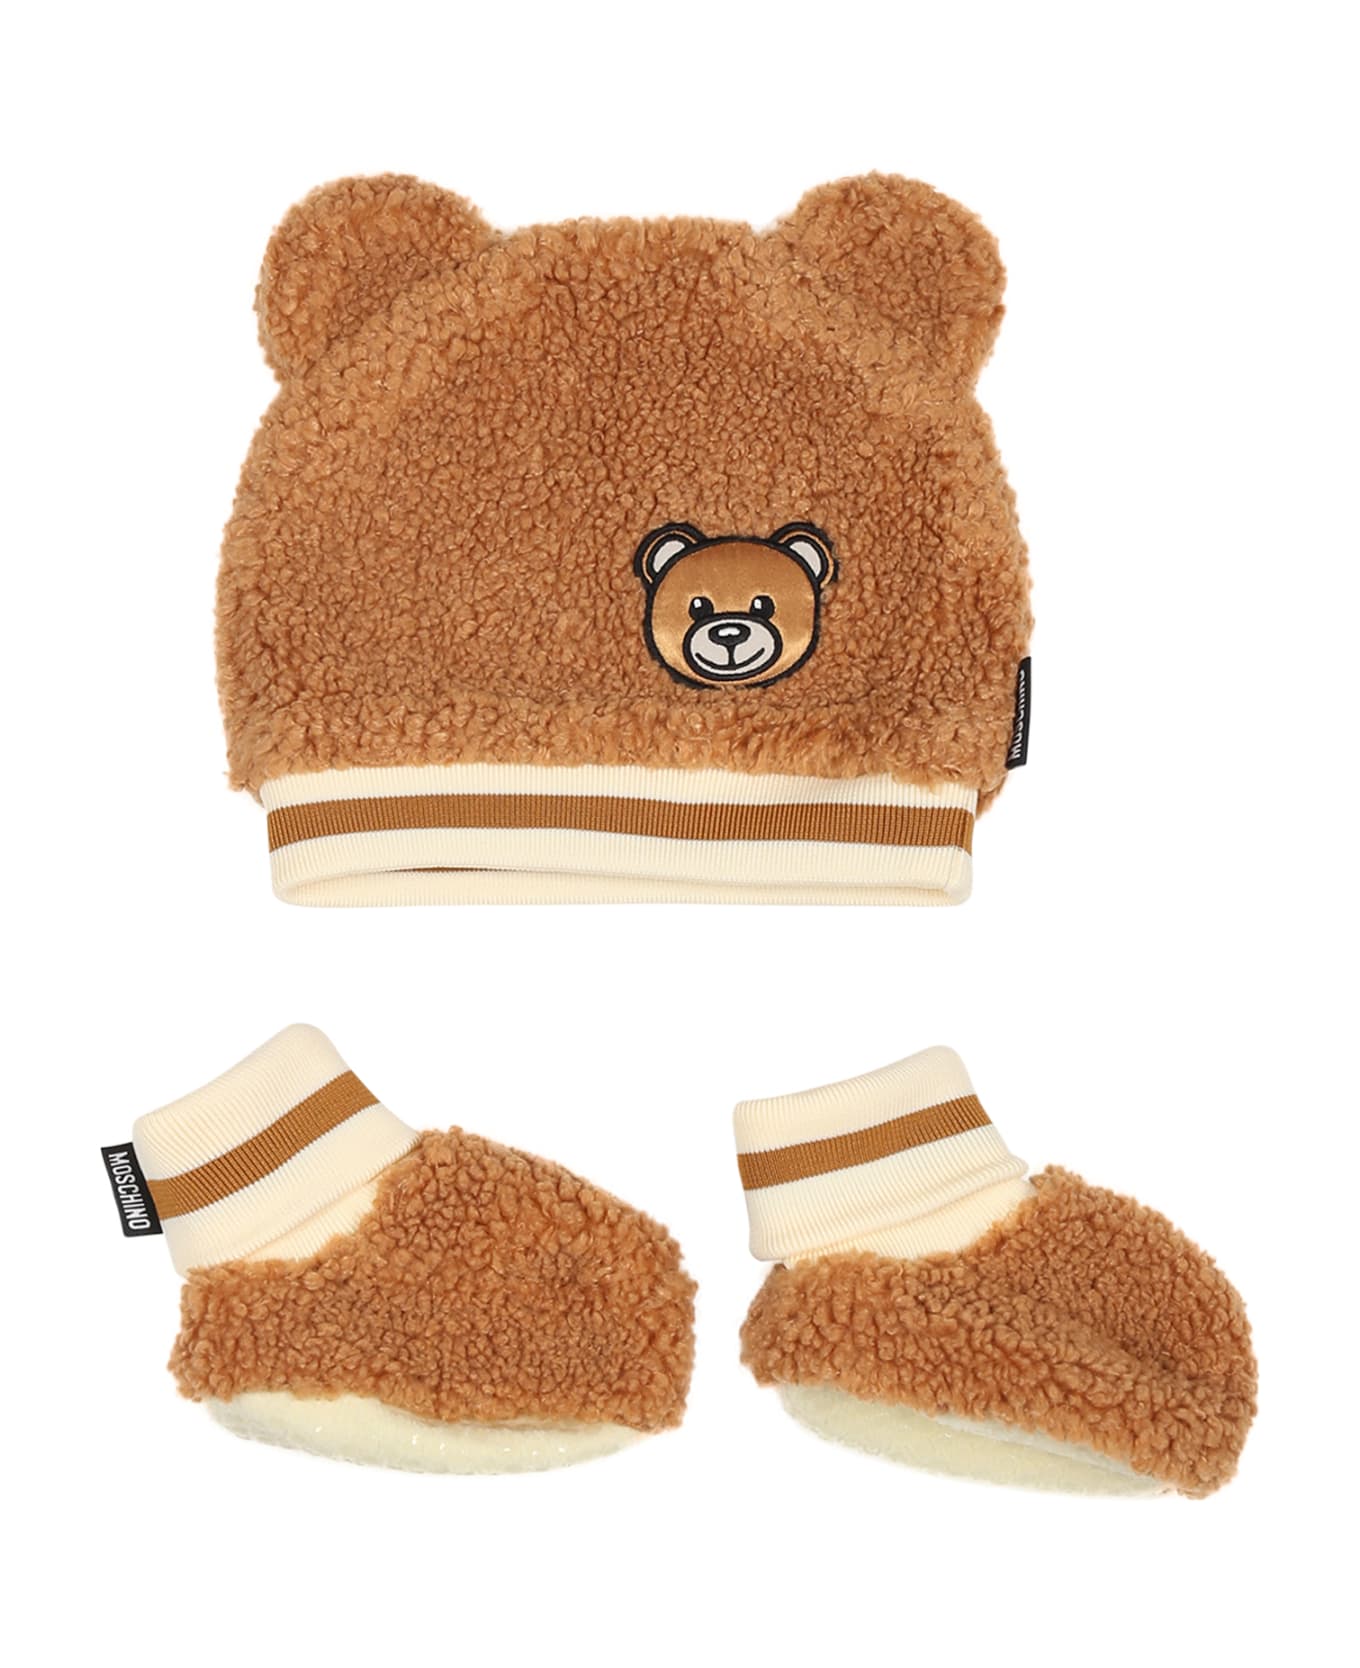 Moschino Brown Set For Babykids With Teddy Bear - Brown アクセサリー＆ギフト